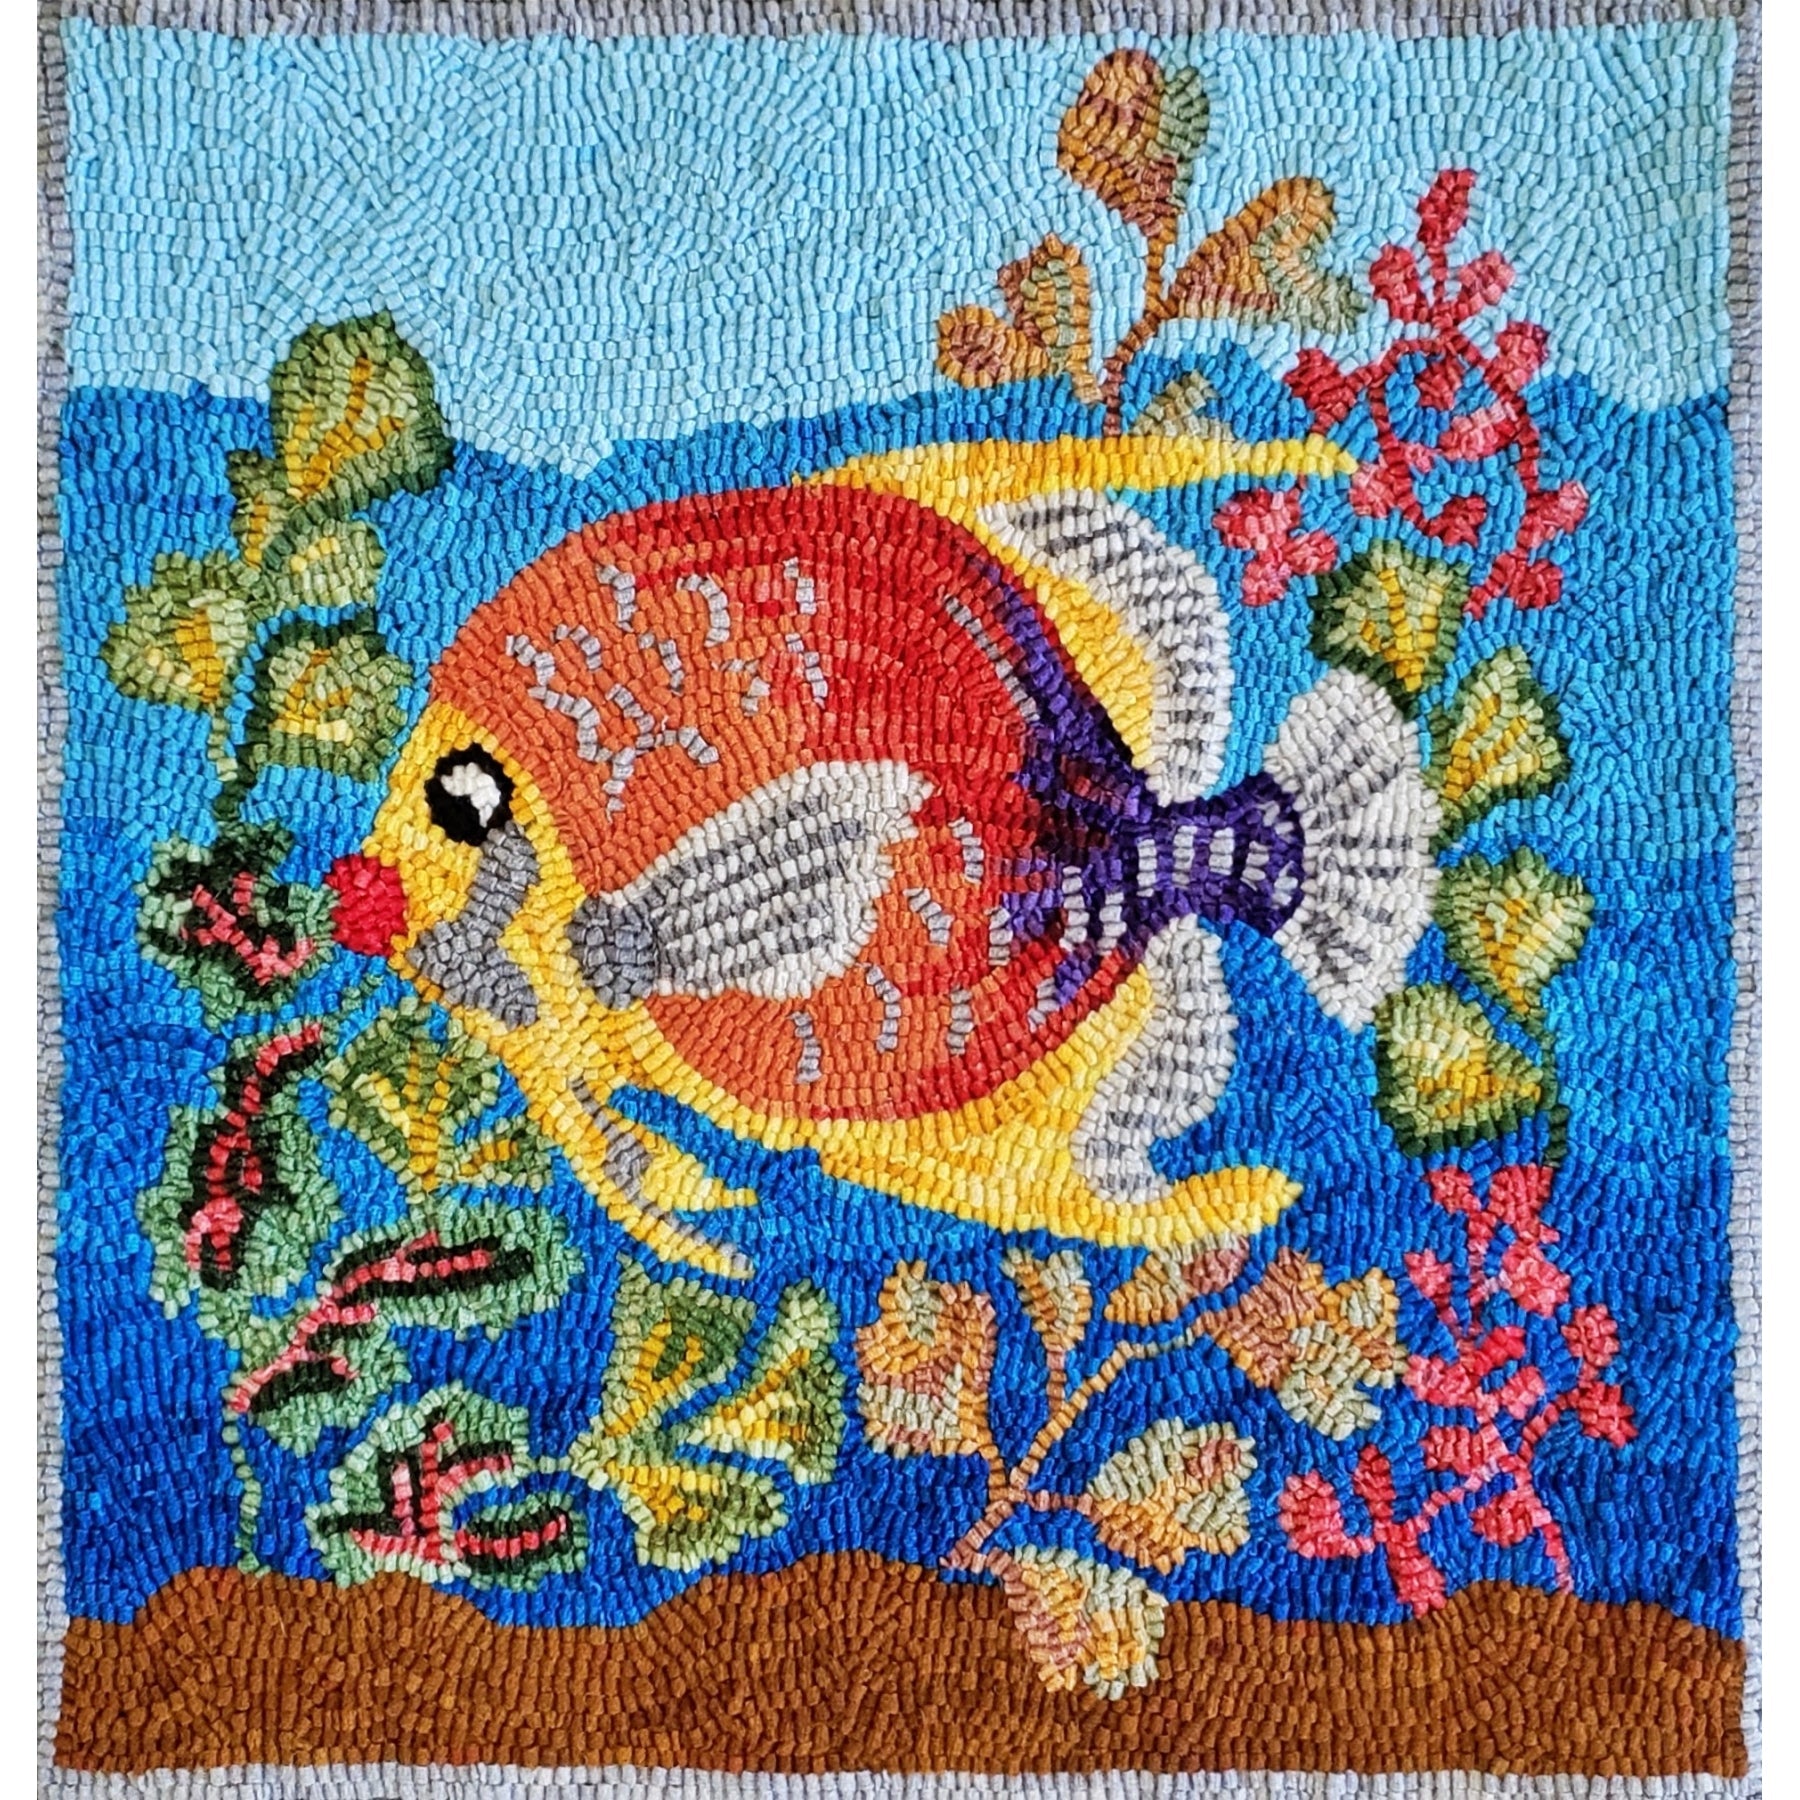 Coral Reef, rug hooked by Donna Martin